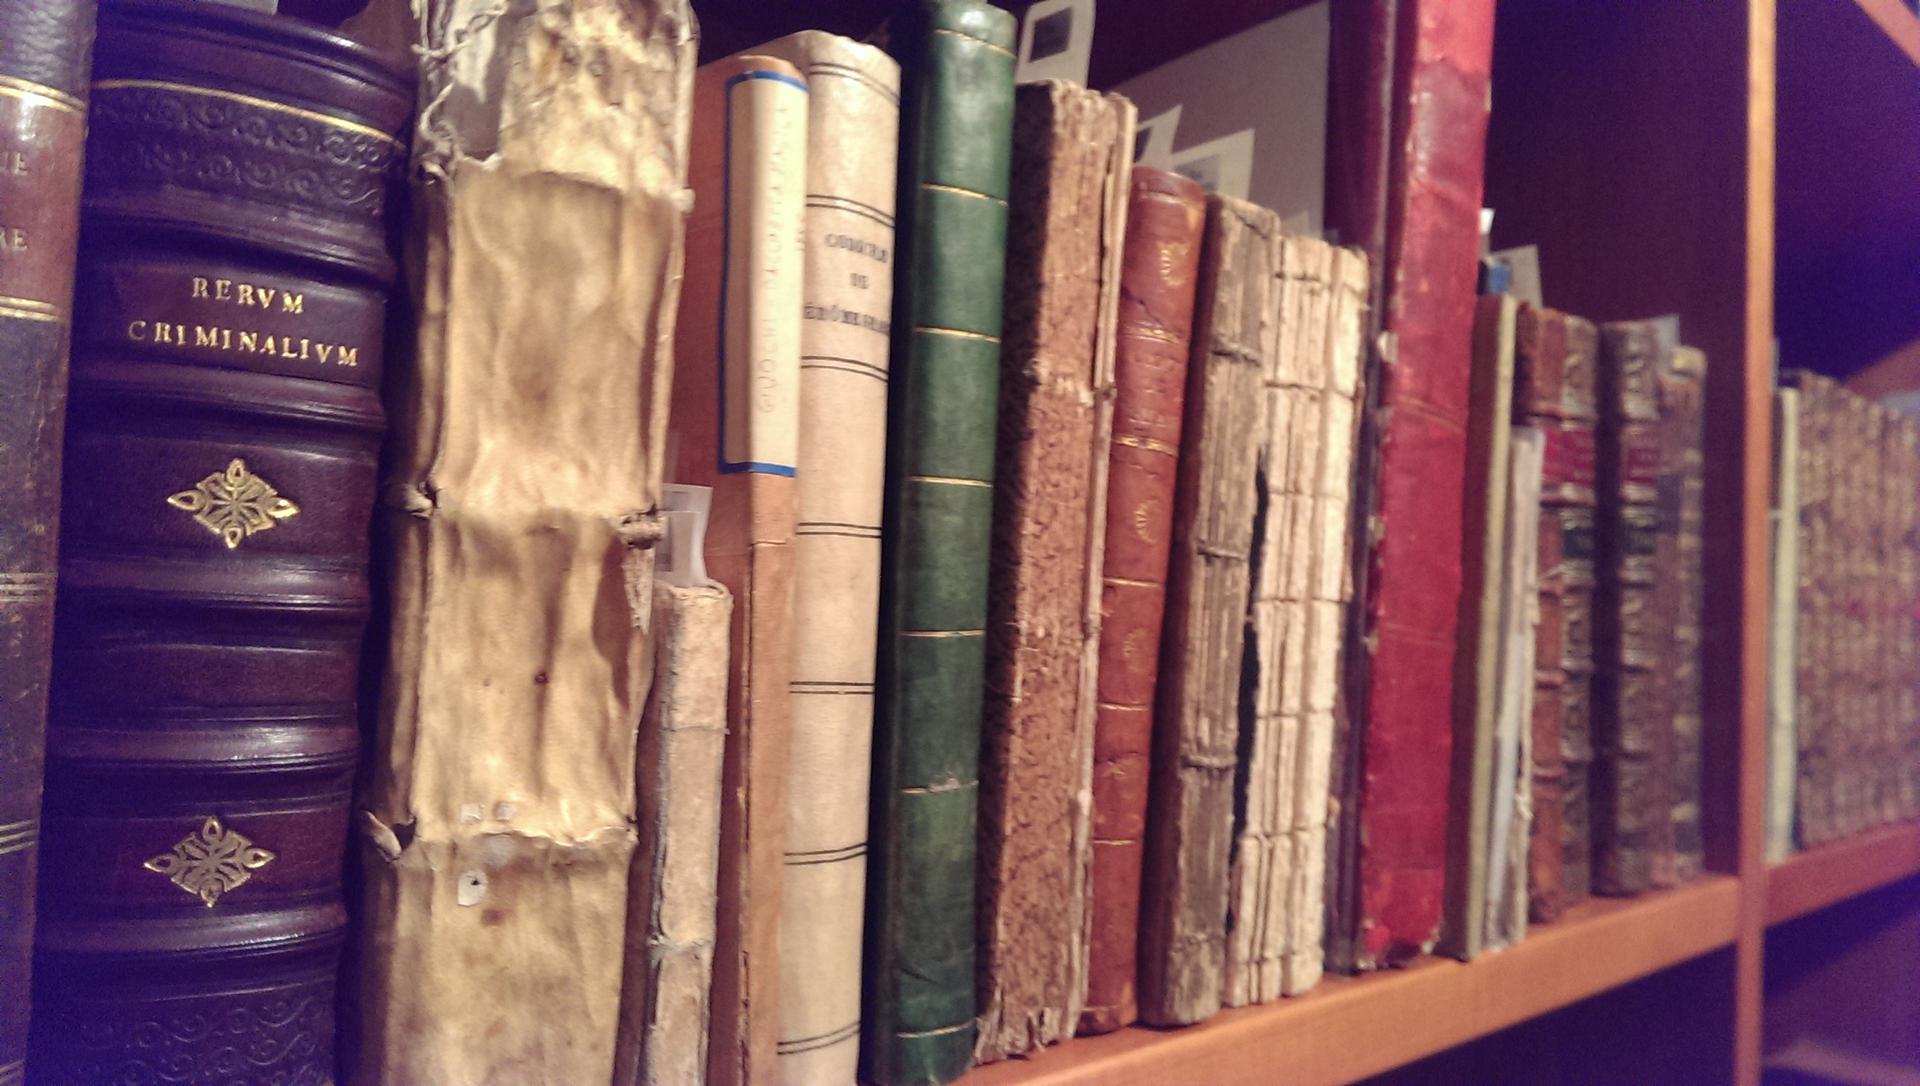 A bookshelf at the Conjuring Arts Research Center in NYC